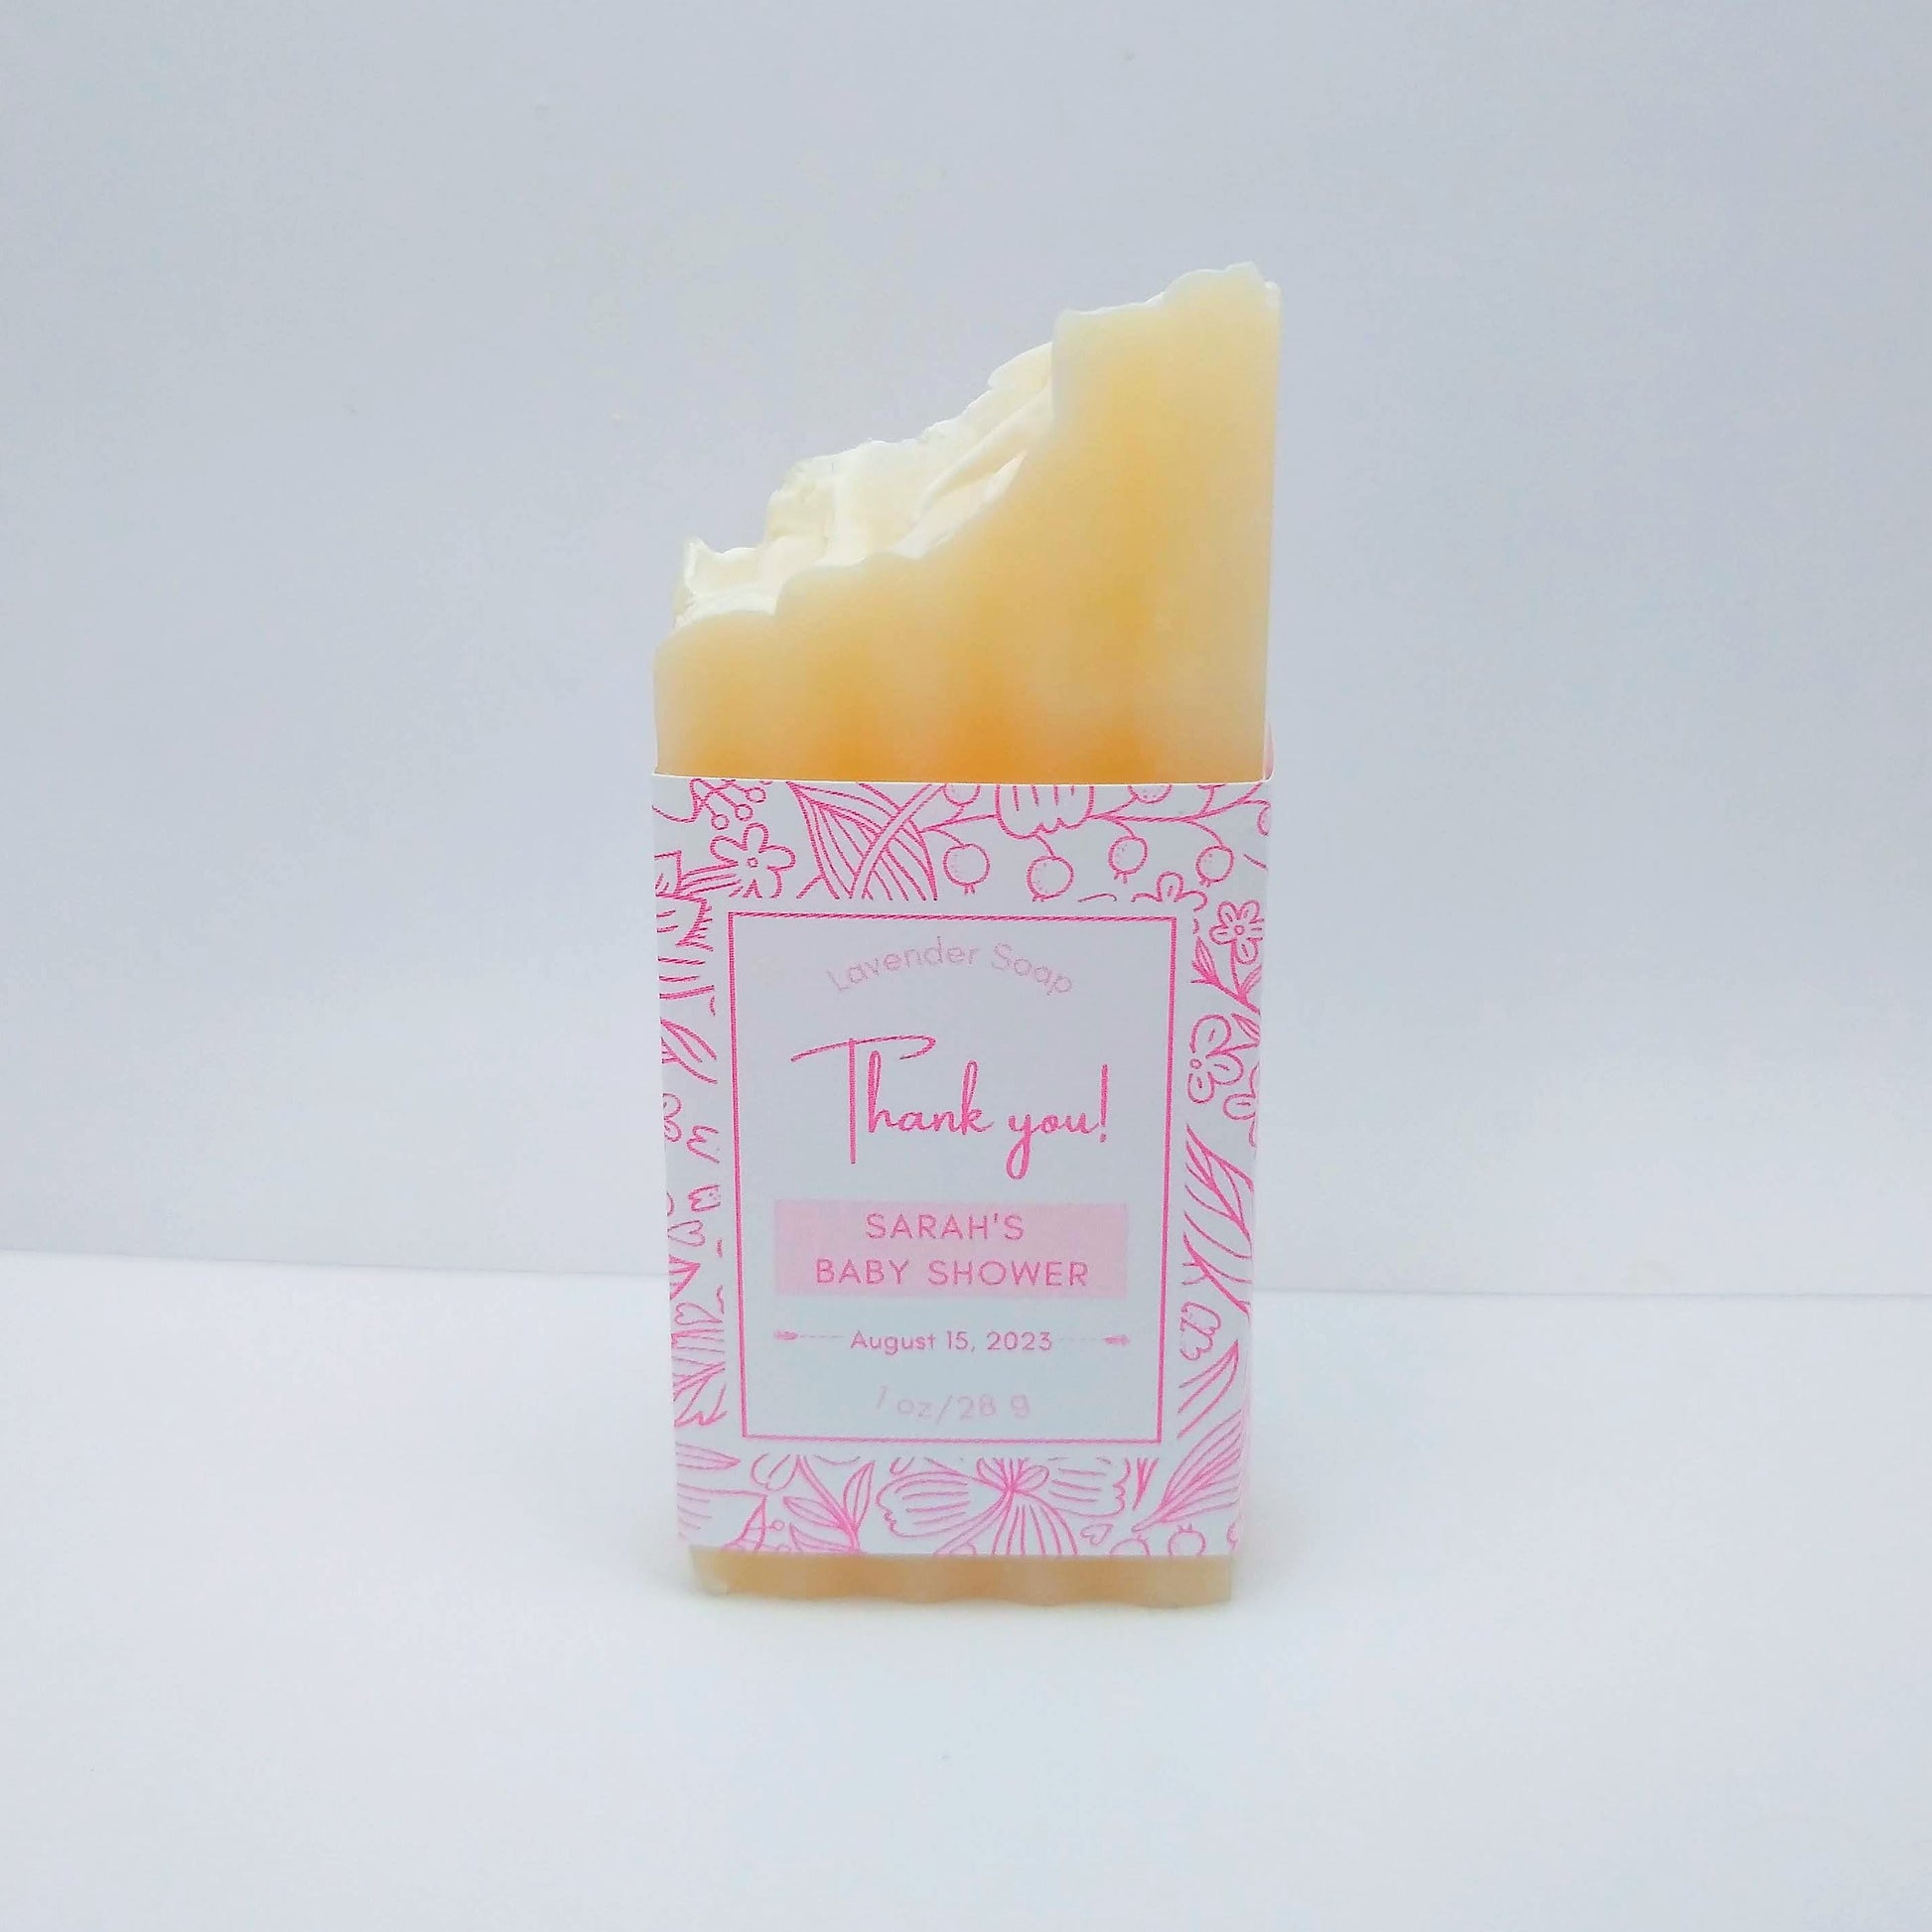 A mini bar of cream-colored soap with a pink label printed with Thank You!, Sarah's Baby Shower, August 15, 2023.